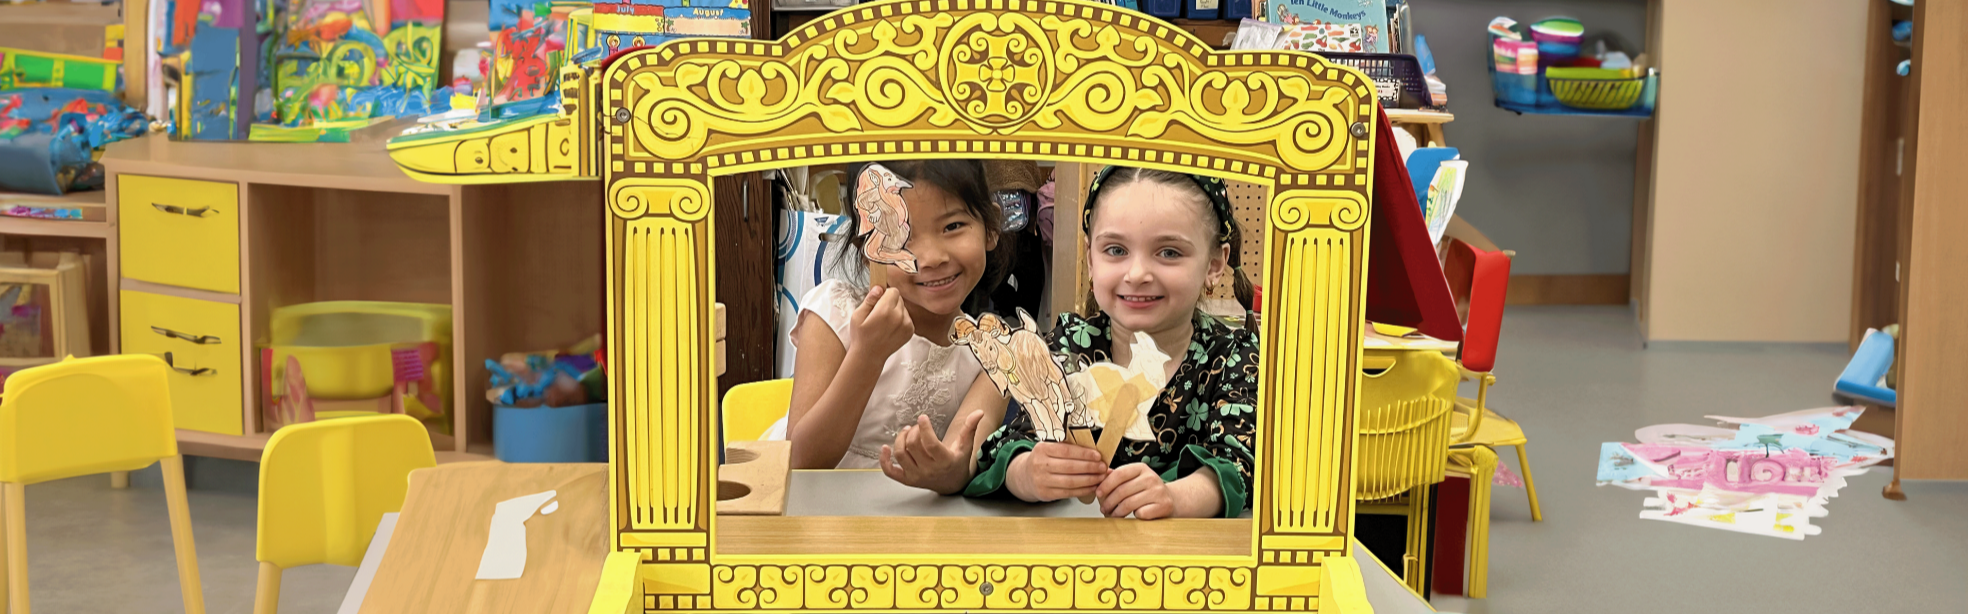 These are two pre-school students using puppet theater to retell a story